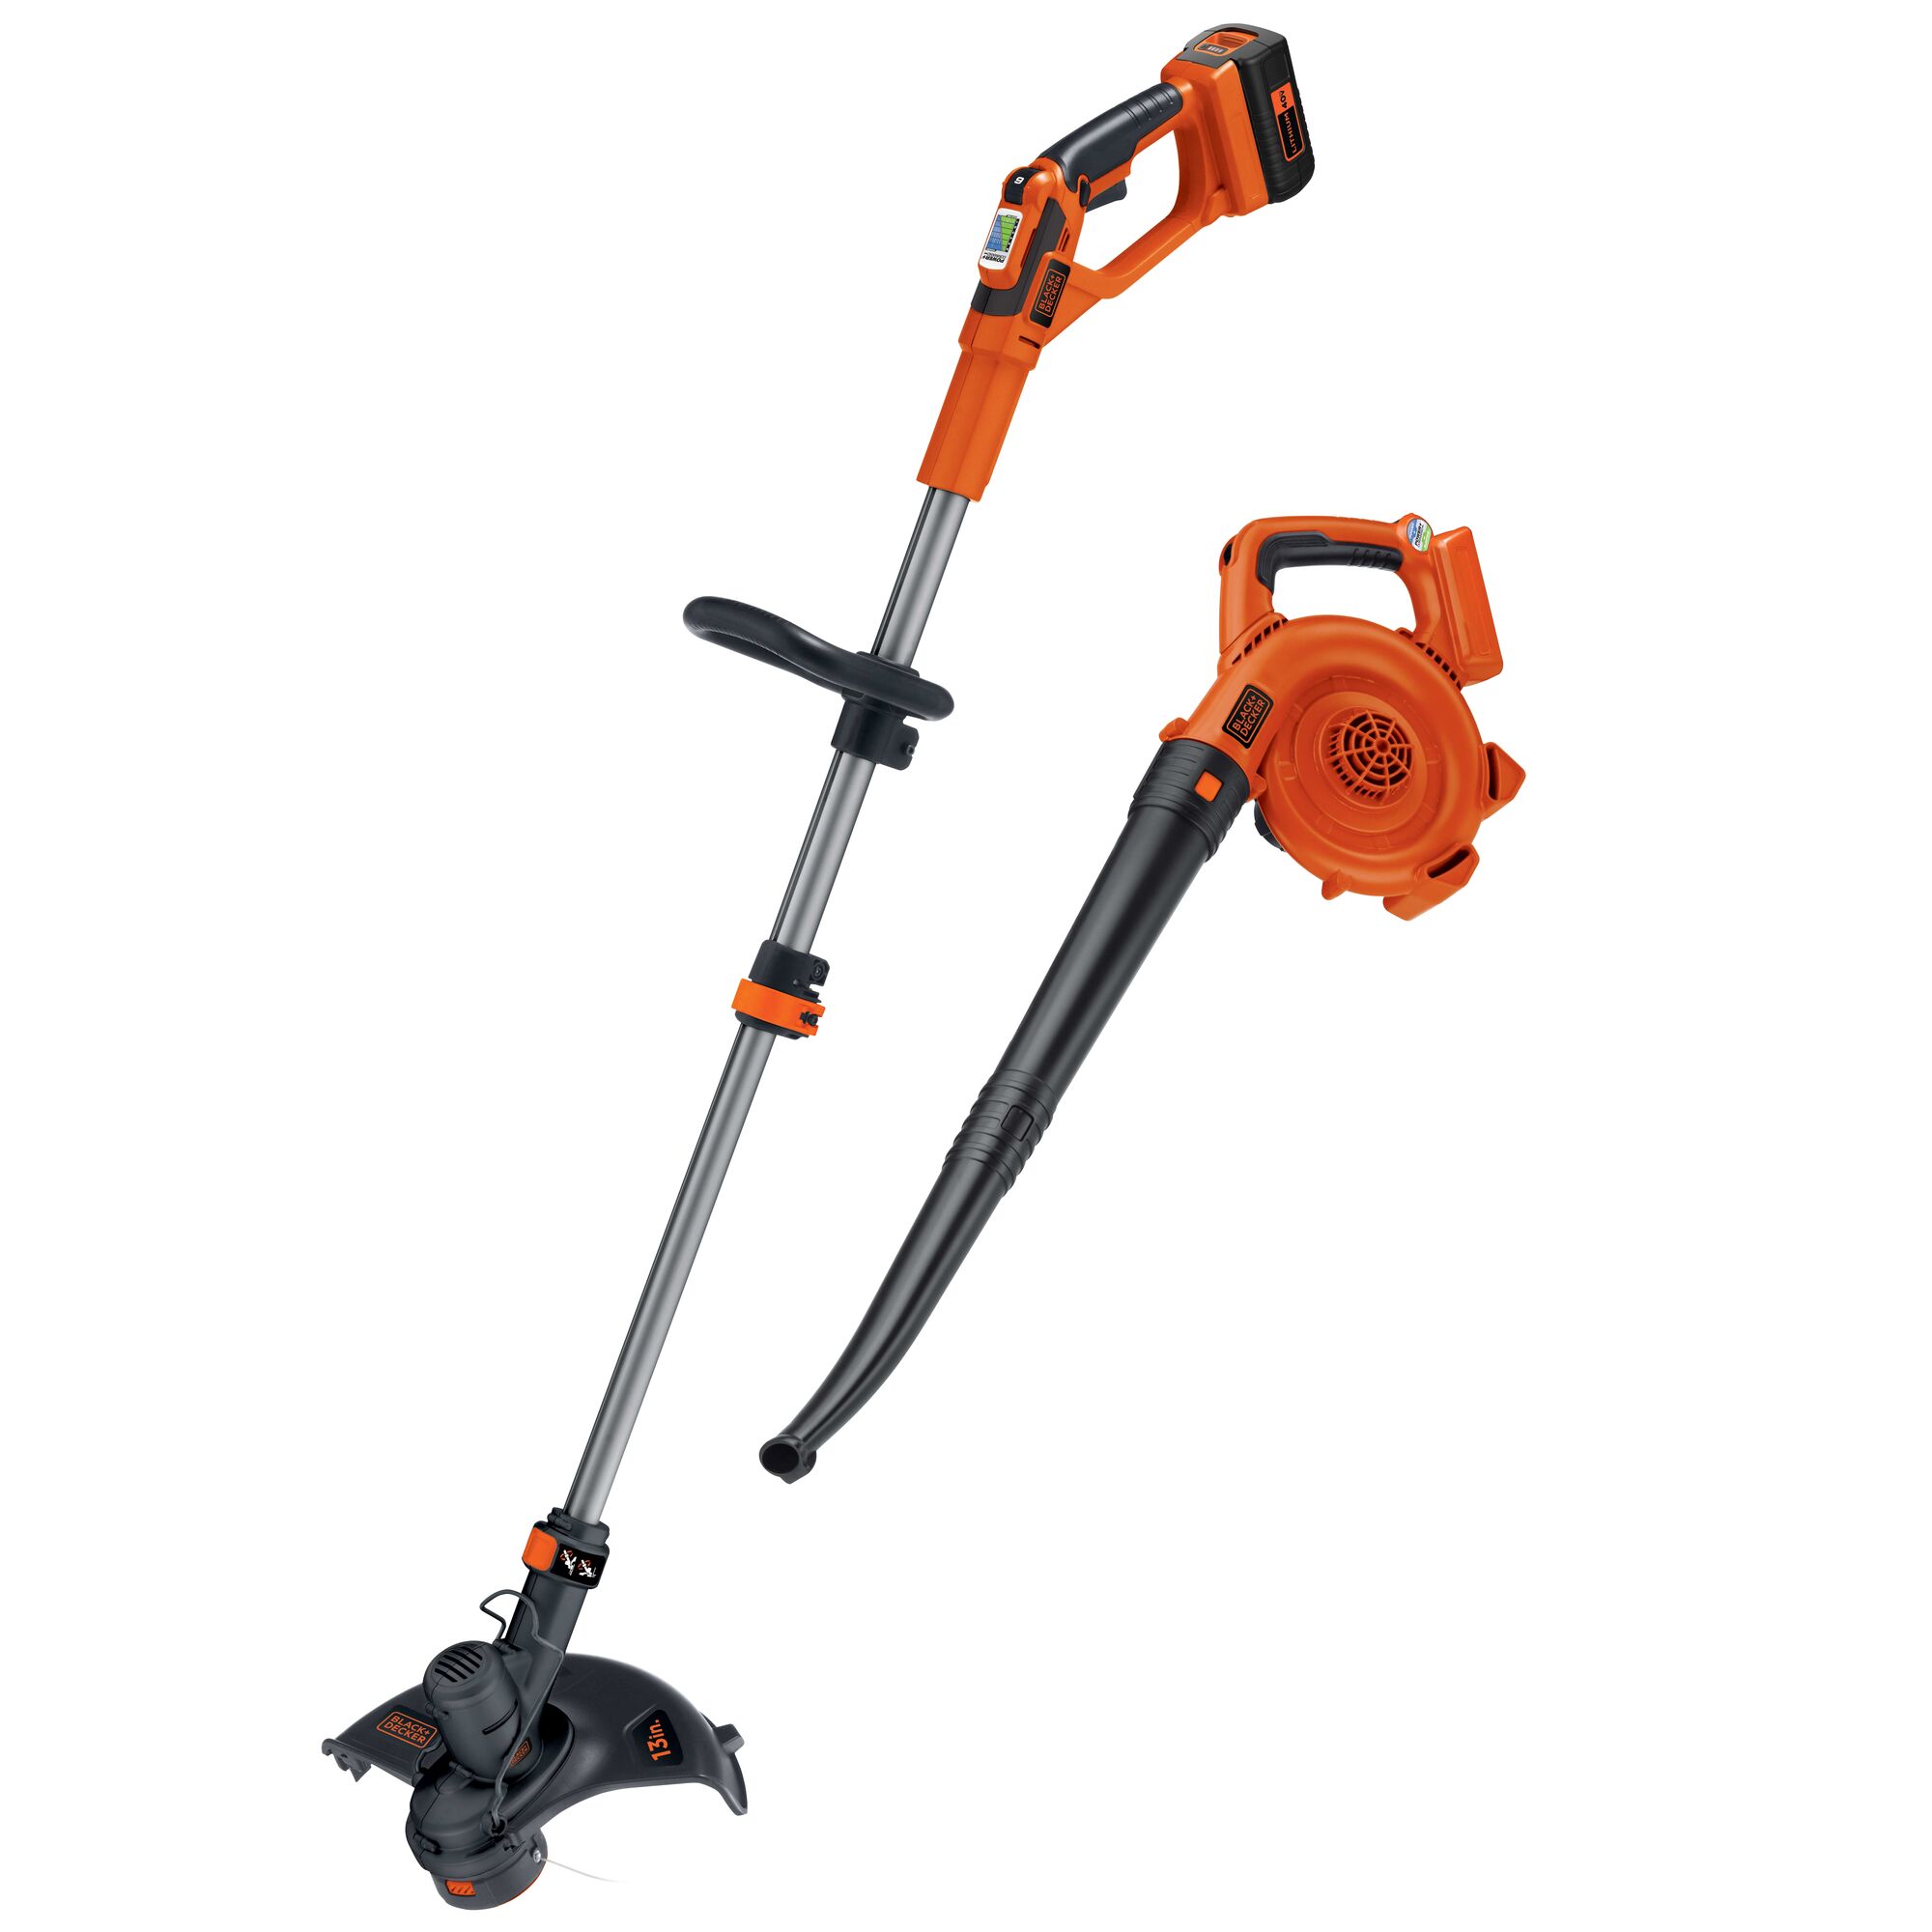 Lithium String Trimmer plus Sweeper Combo Kit.